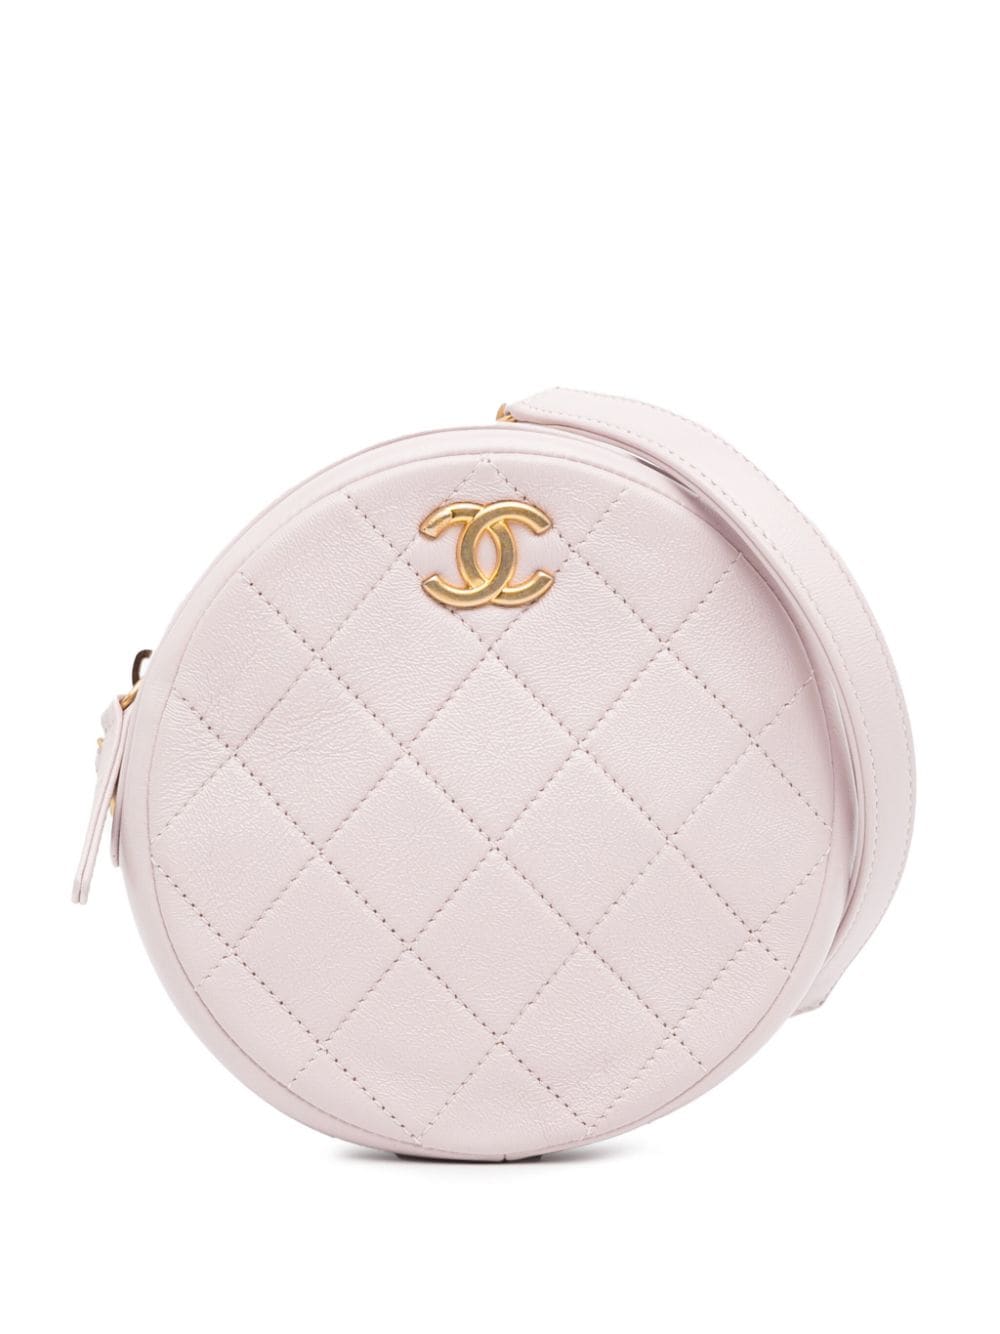 CHANEL Pre-Owned 2020 runde Clutch mit Kette - Rosa von CHANEL Pre-Owned